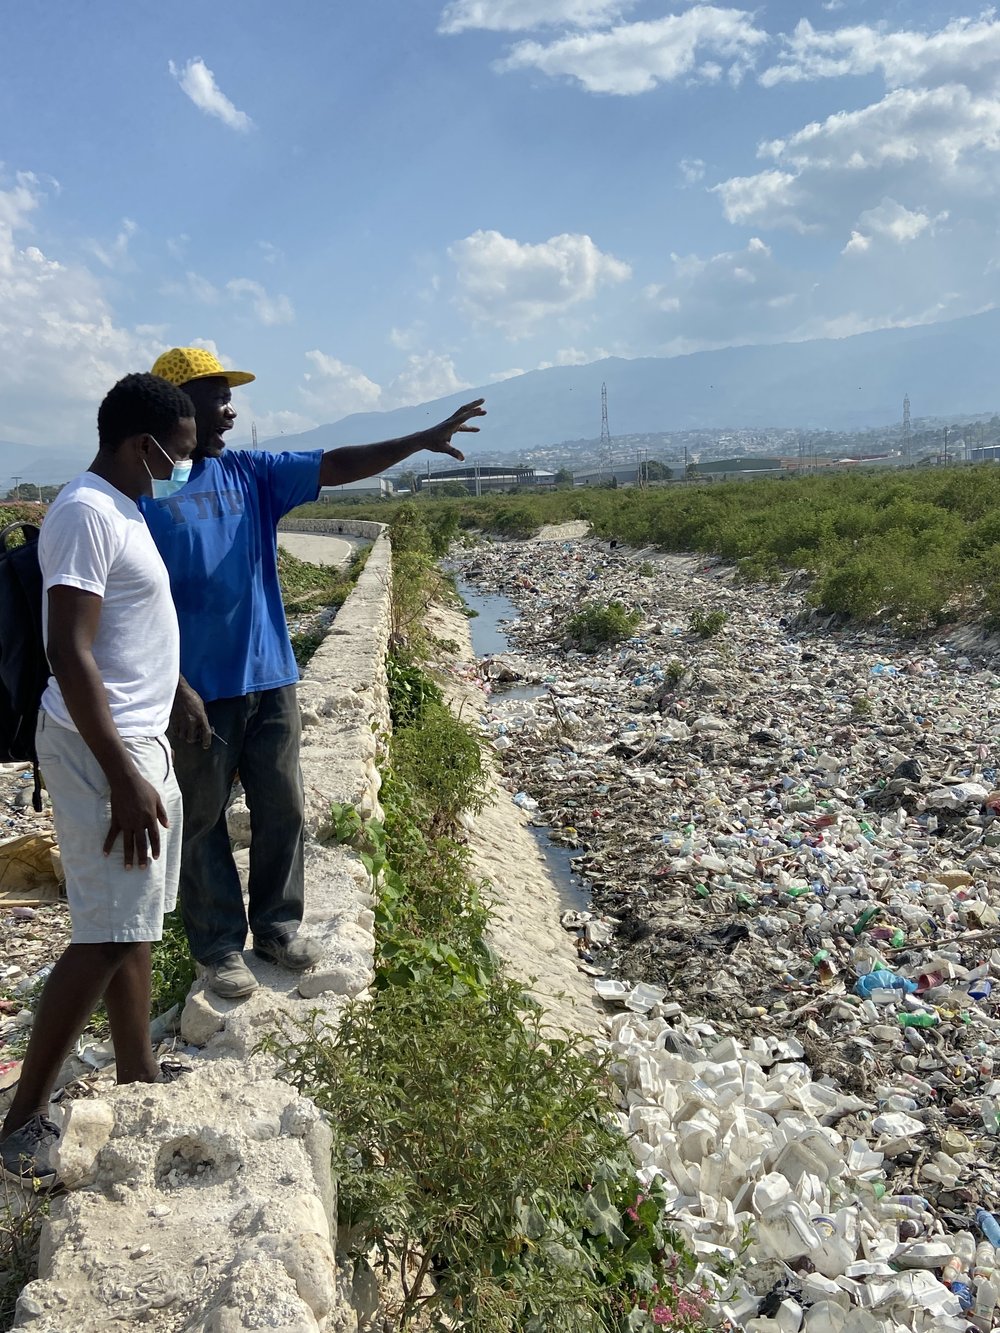  Jean Nause, one of our center owners in Port-au-Prince is discussing his vision for how to safely gather the valuable plastic material out of canals across the Port-au-Prince. 